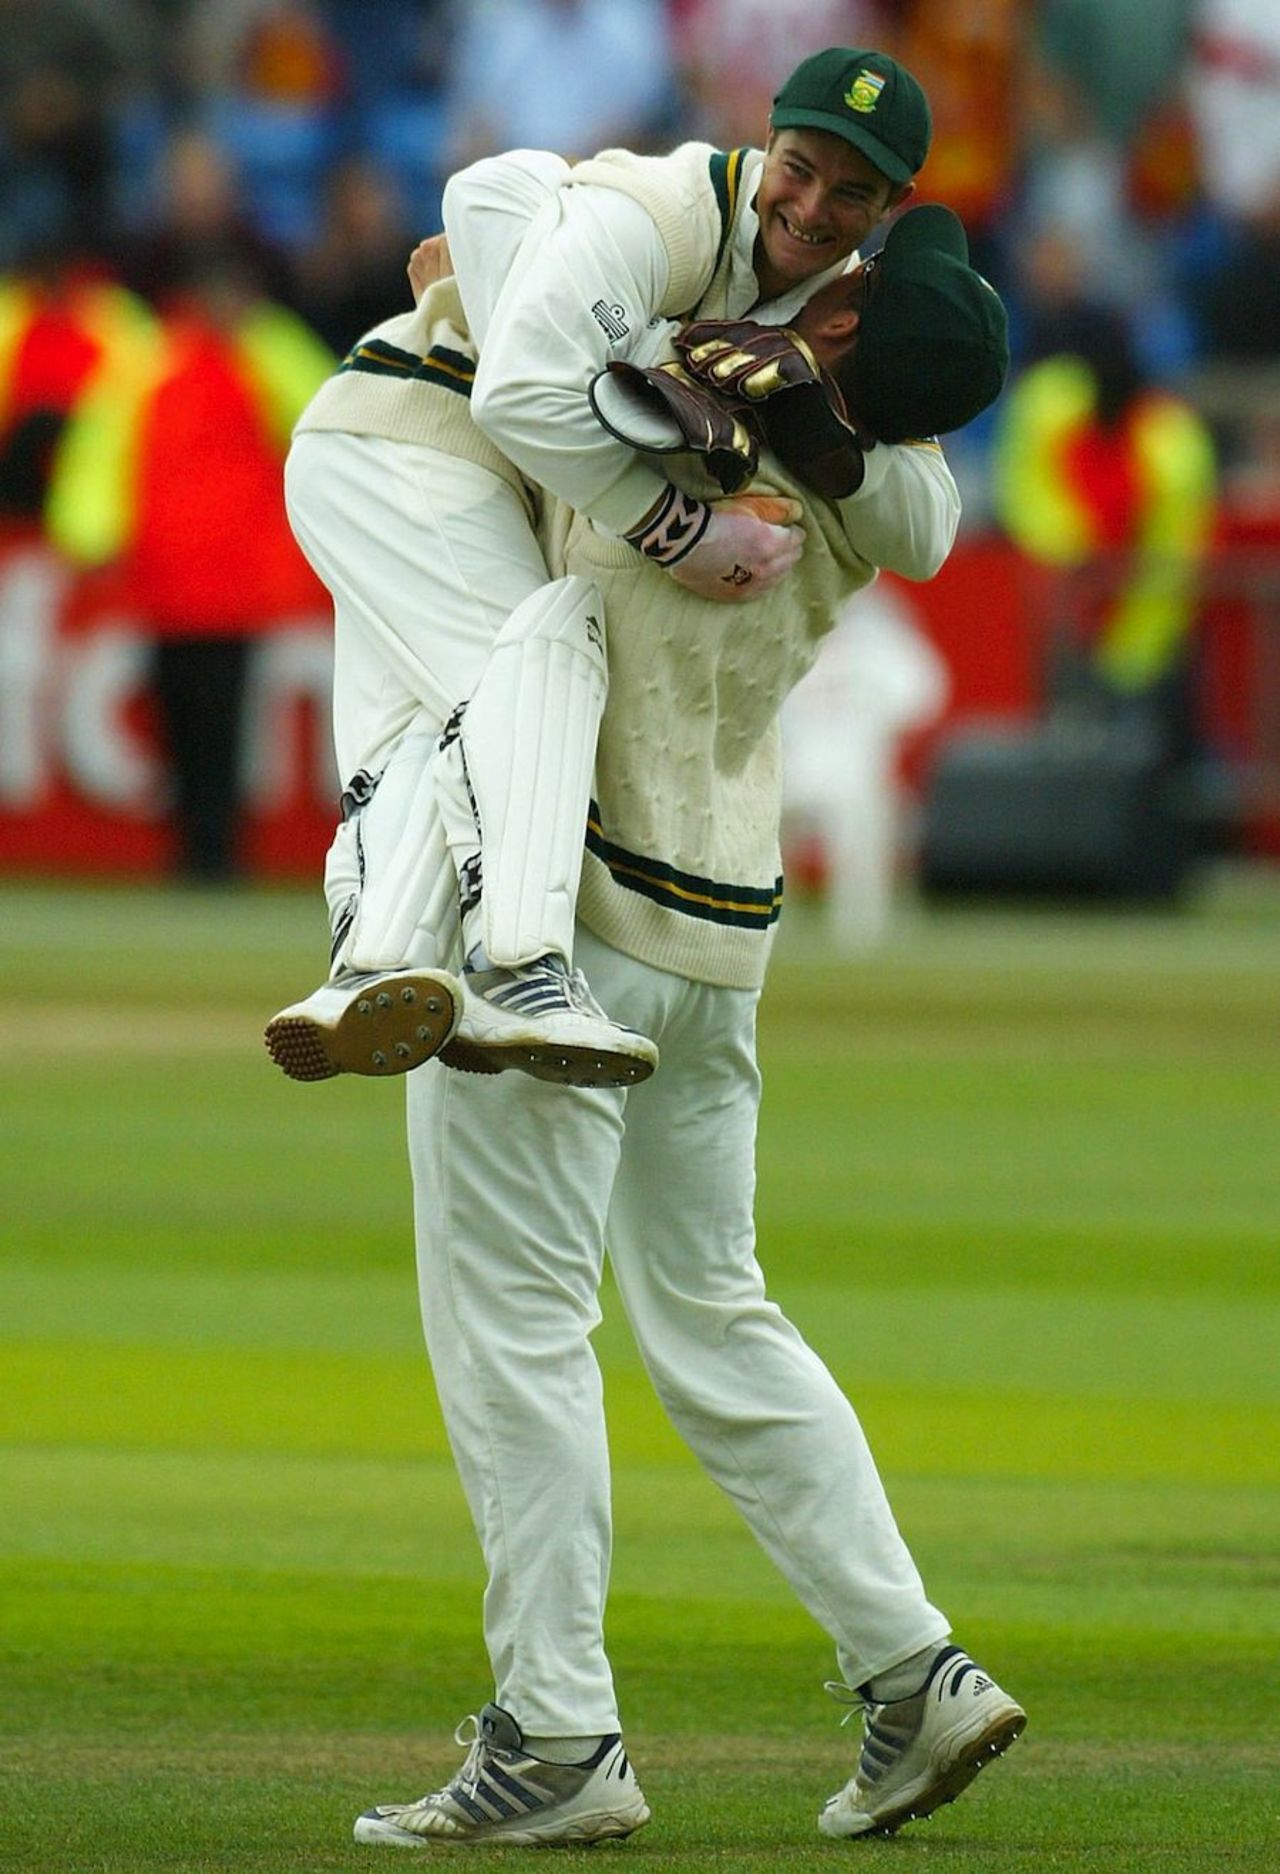 Graeme Smith and Mark Boucher celebrate a wicket at Headingley, England v South Africa, 4th Test, Leeds, August 25, 2003